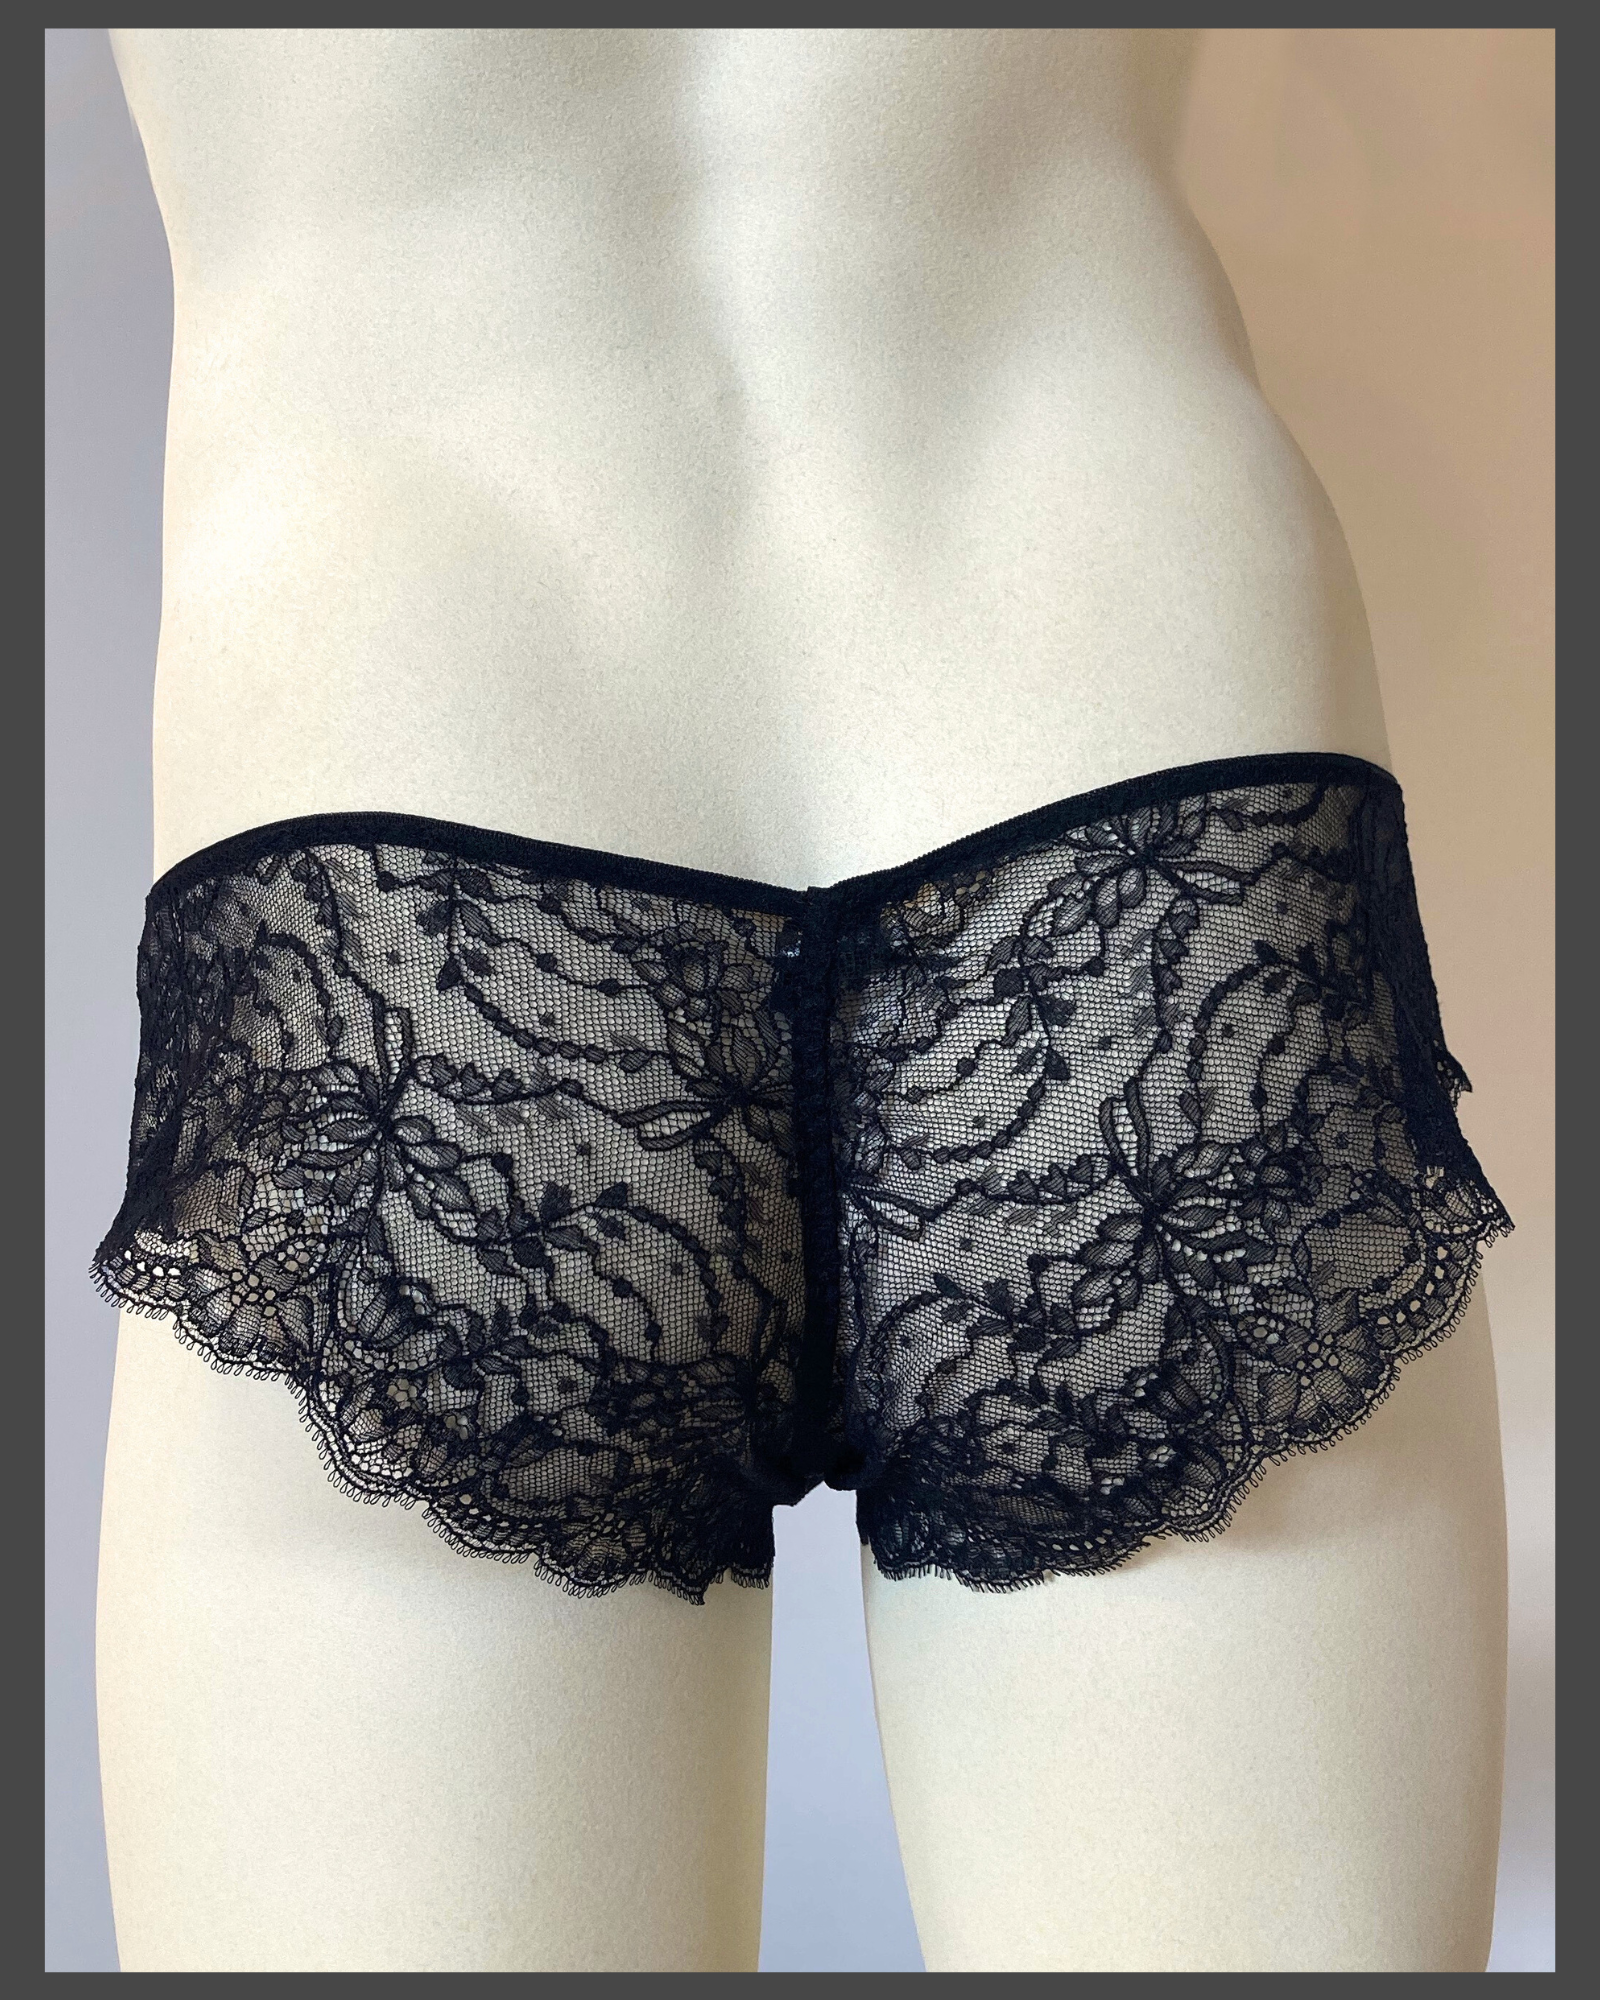 Lace knickers for men, men in lace, kinky lace panties, lace panties for him, lace boxers, frilly knickers for men, can men wear lace panties?, buy lace knickers for men, men in panties, view of bottom in lace panties